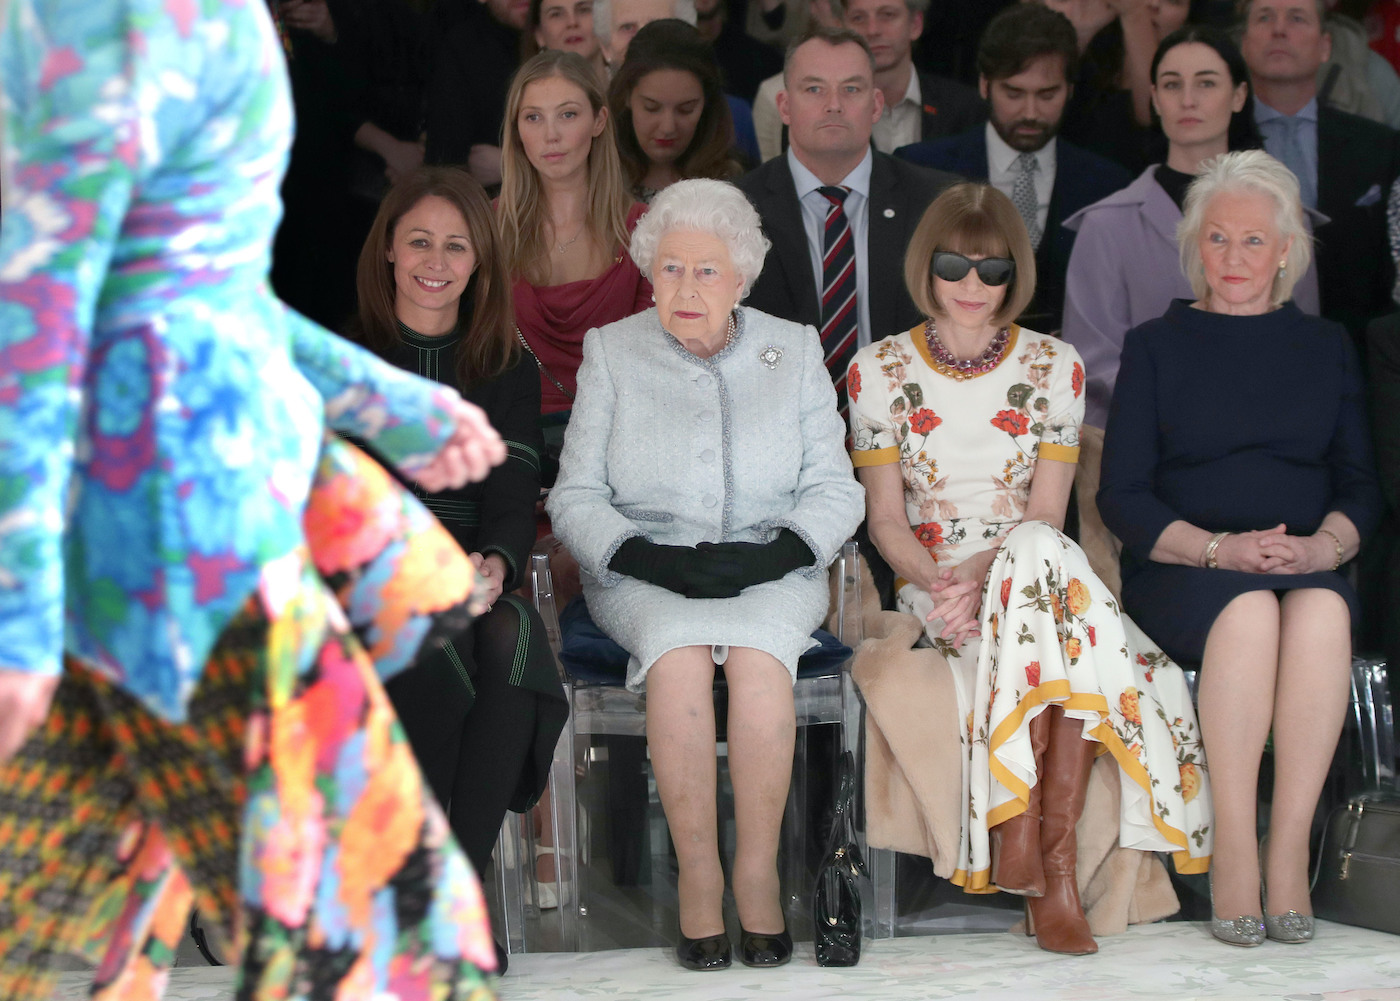 Caroline Rush, Queen Elizabeth II, Anna Wintour, and Angela Kelly sit in the front row of a fashion show